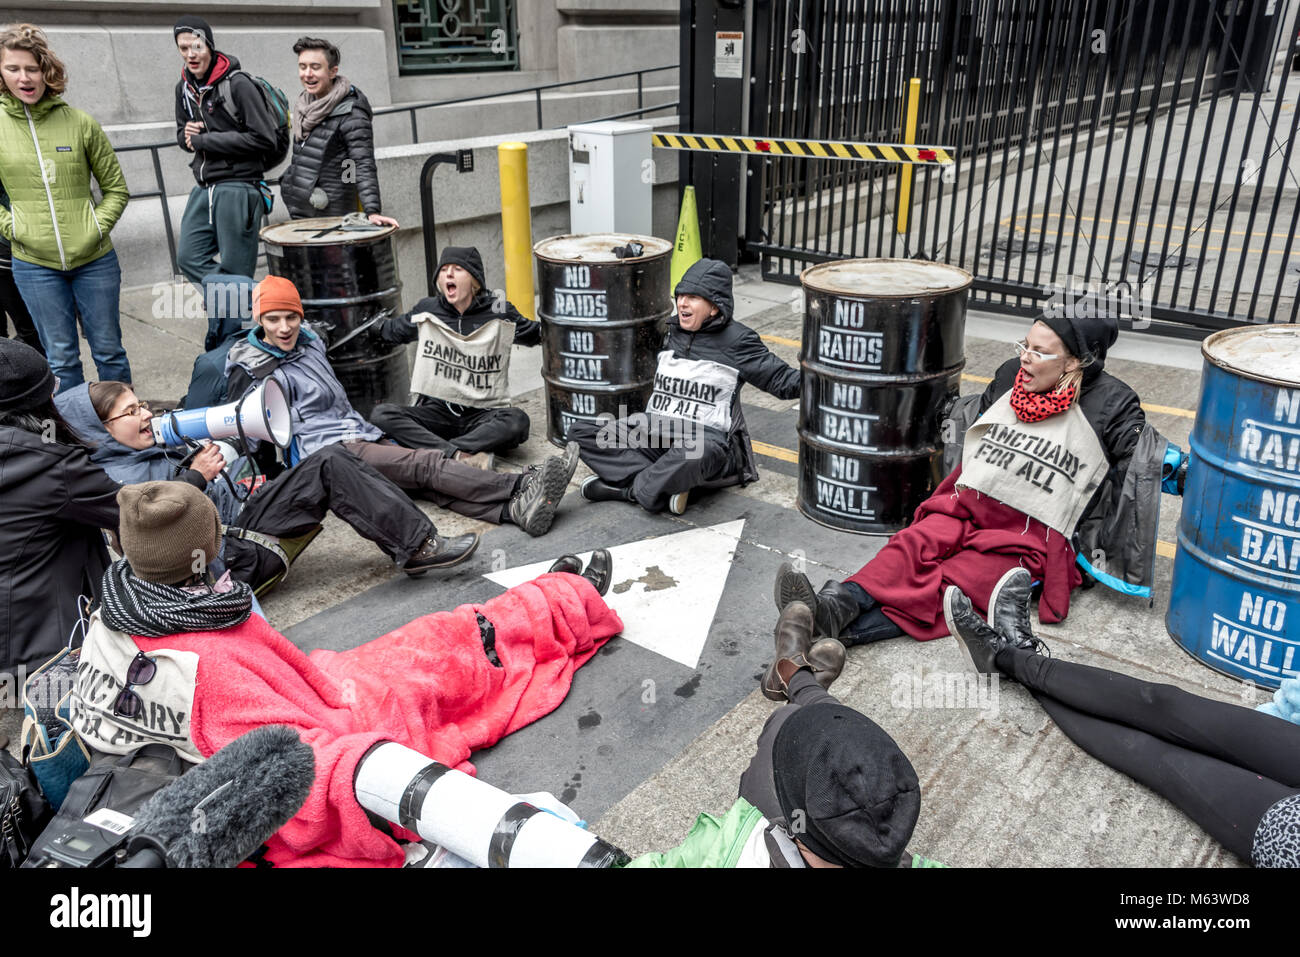 San Francisco, USA. 28th February, 2018. An estimated three hundred protesters gather outside San Francisco Immigration & Customs Enforcement building (ICE) to protest recent arrests of at least 150 people in ICE operations conducted over the previous few days in Northern California. San Francisco remains a sanctuary city. Shelly Rivoli/Alamy Live News Stock Photo